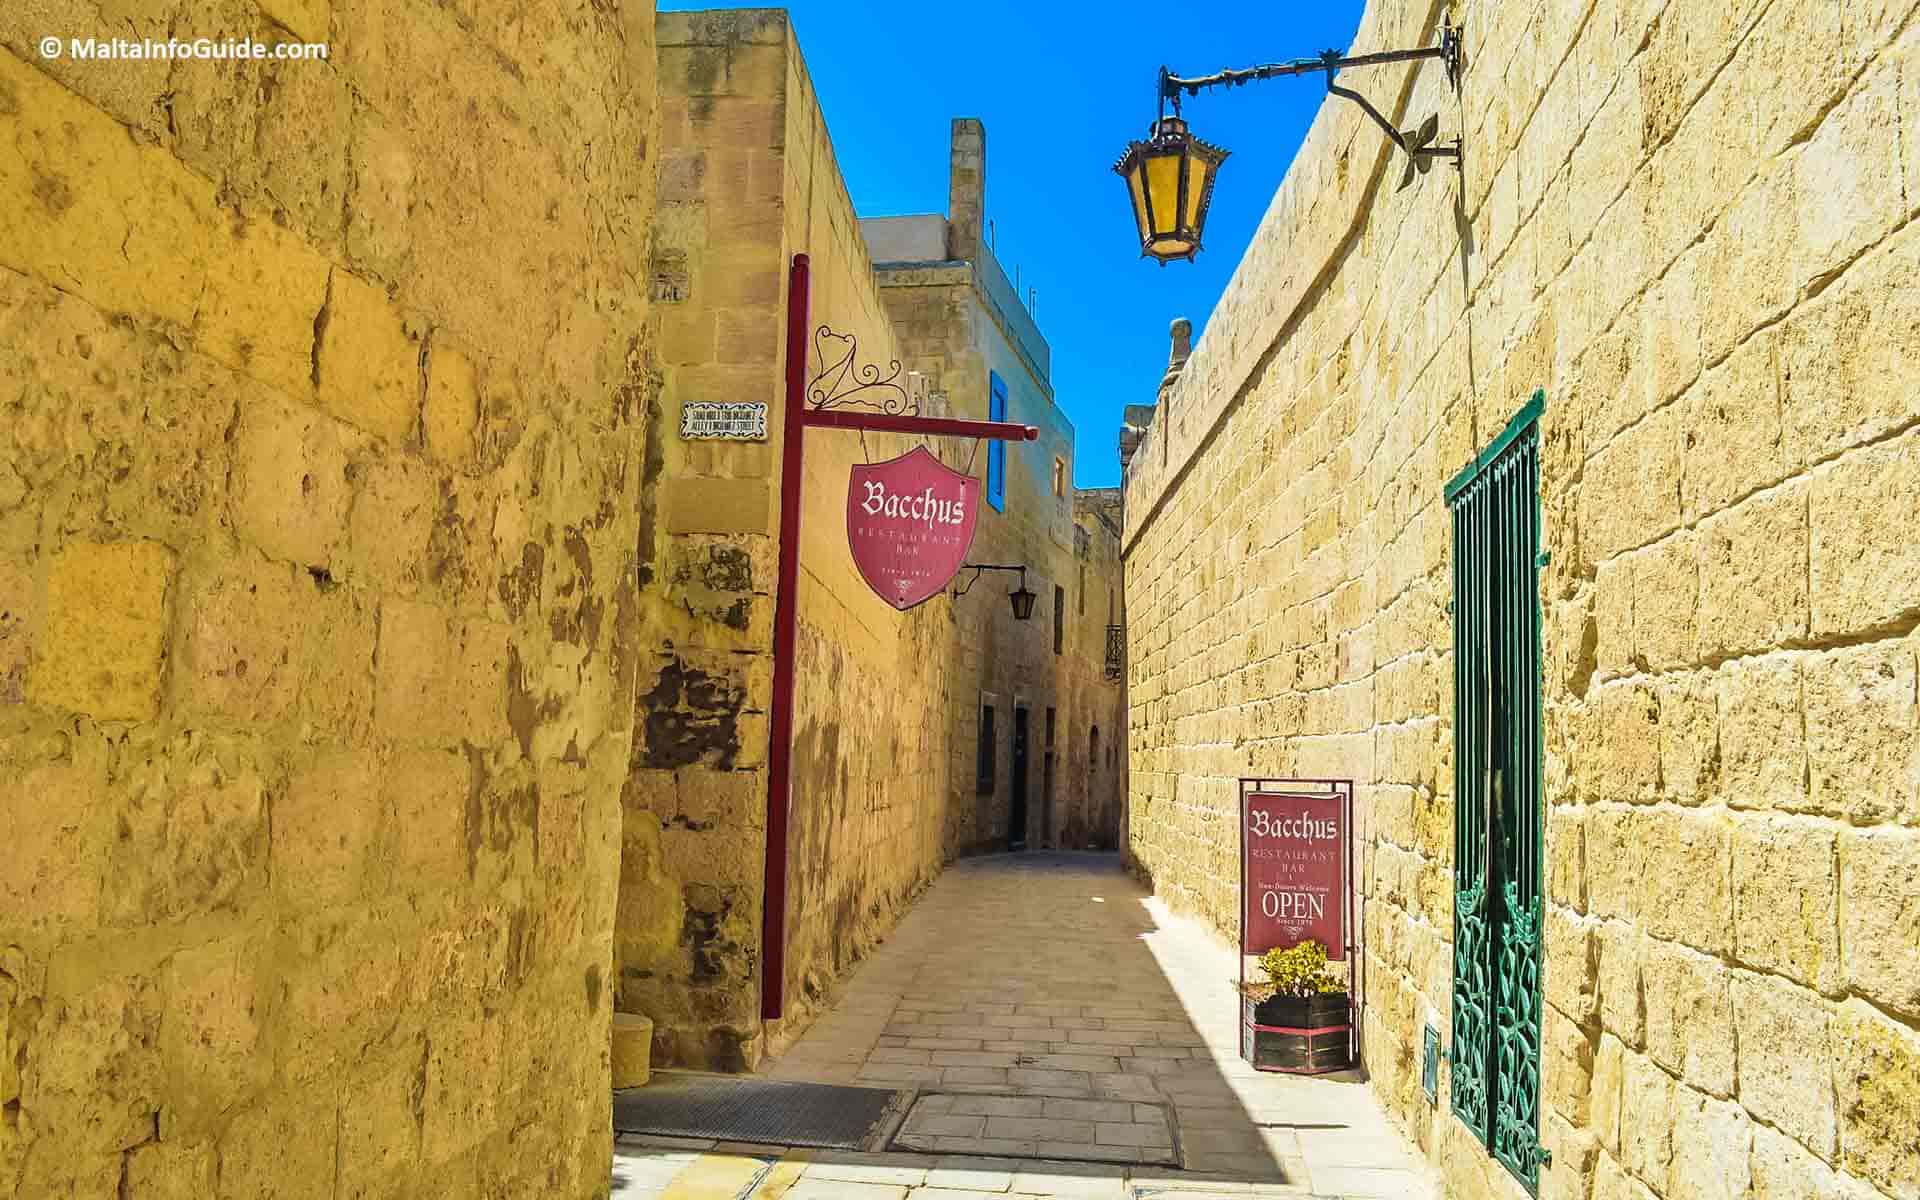 The Bacchus restaurant sign in one of Mdina's narrow streets.